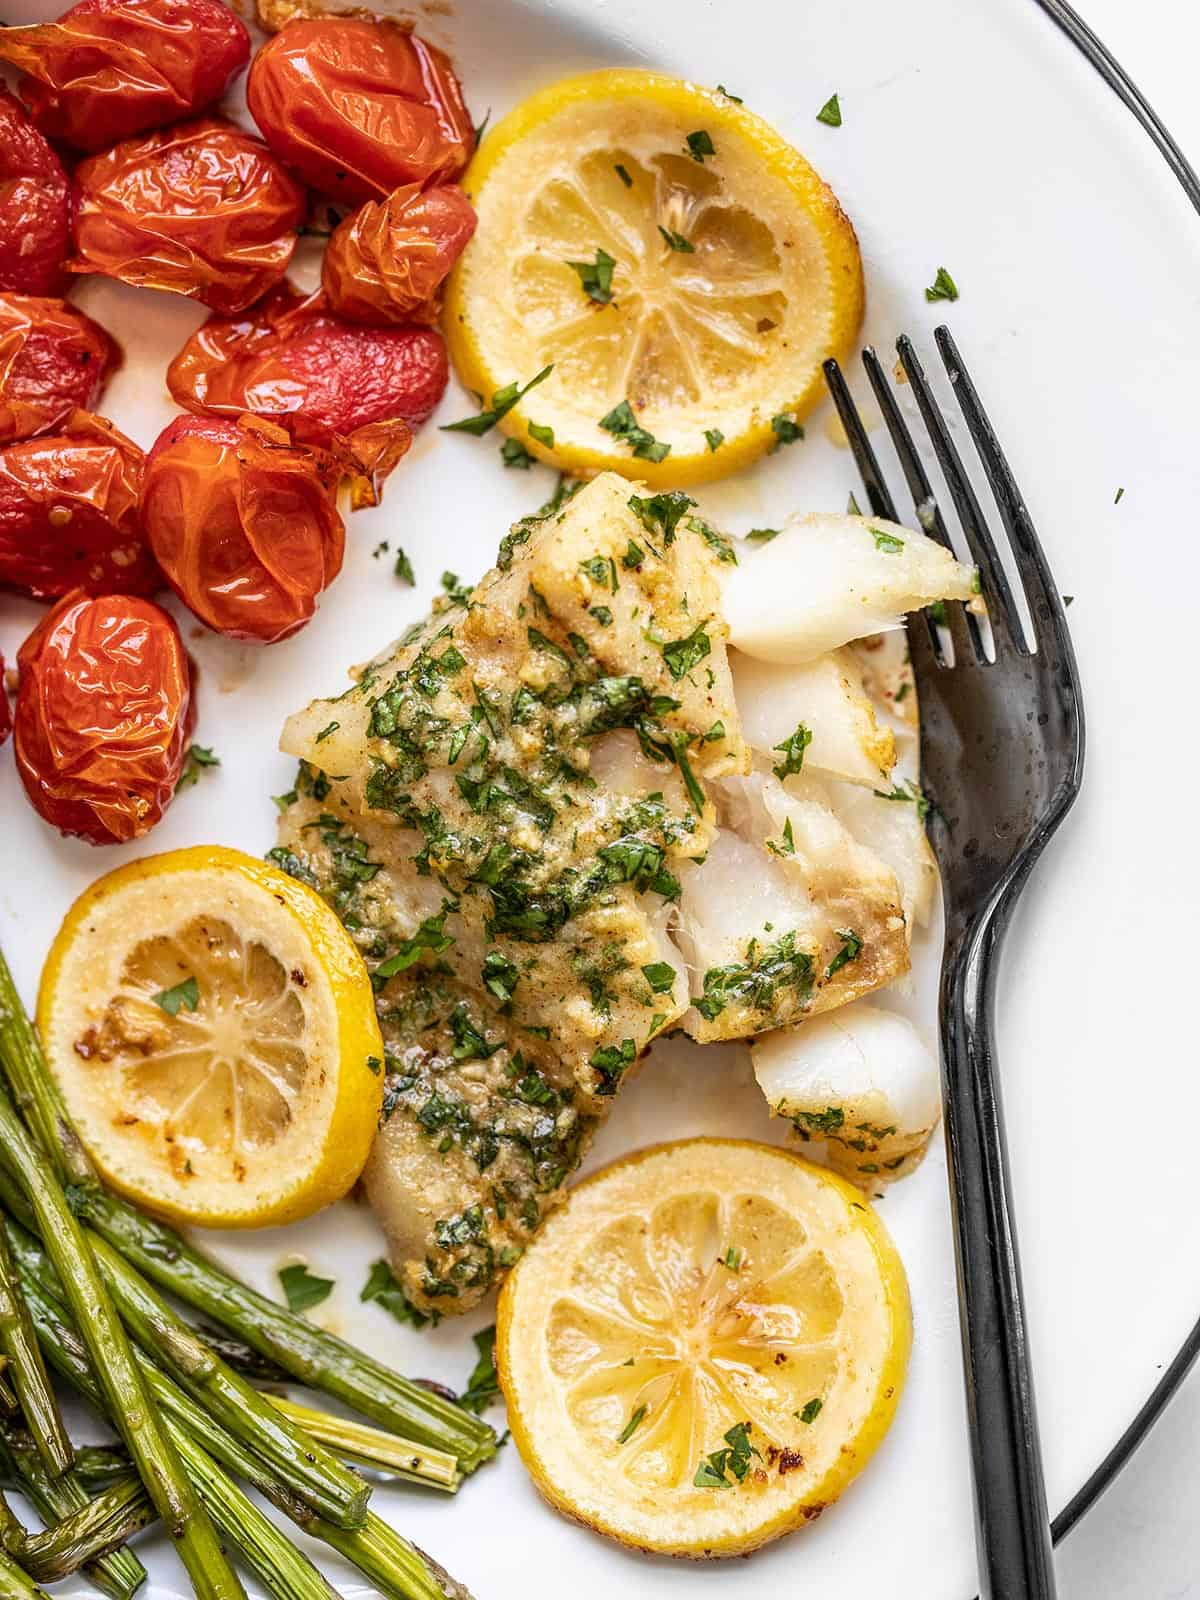 garlic butter baked cod on a plate with tomatoes, asparagus, and a fork